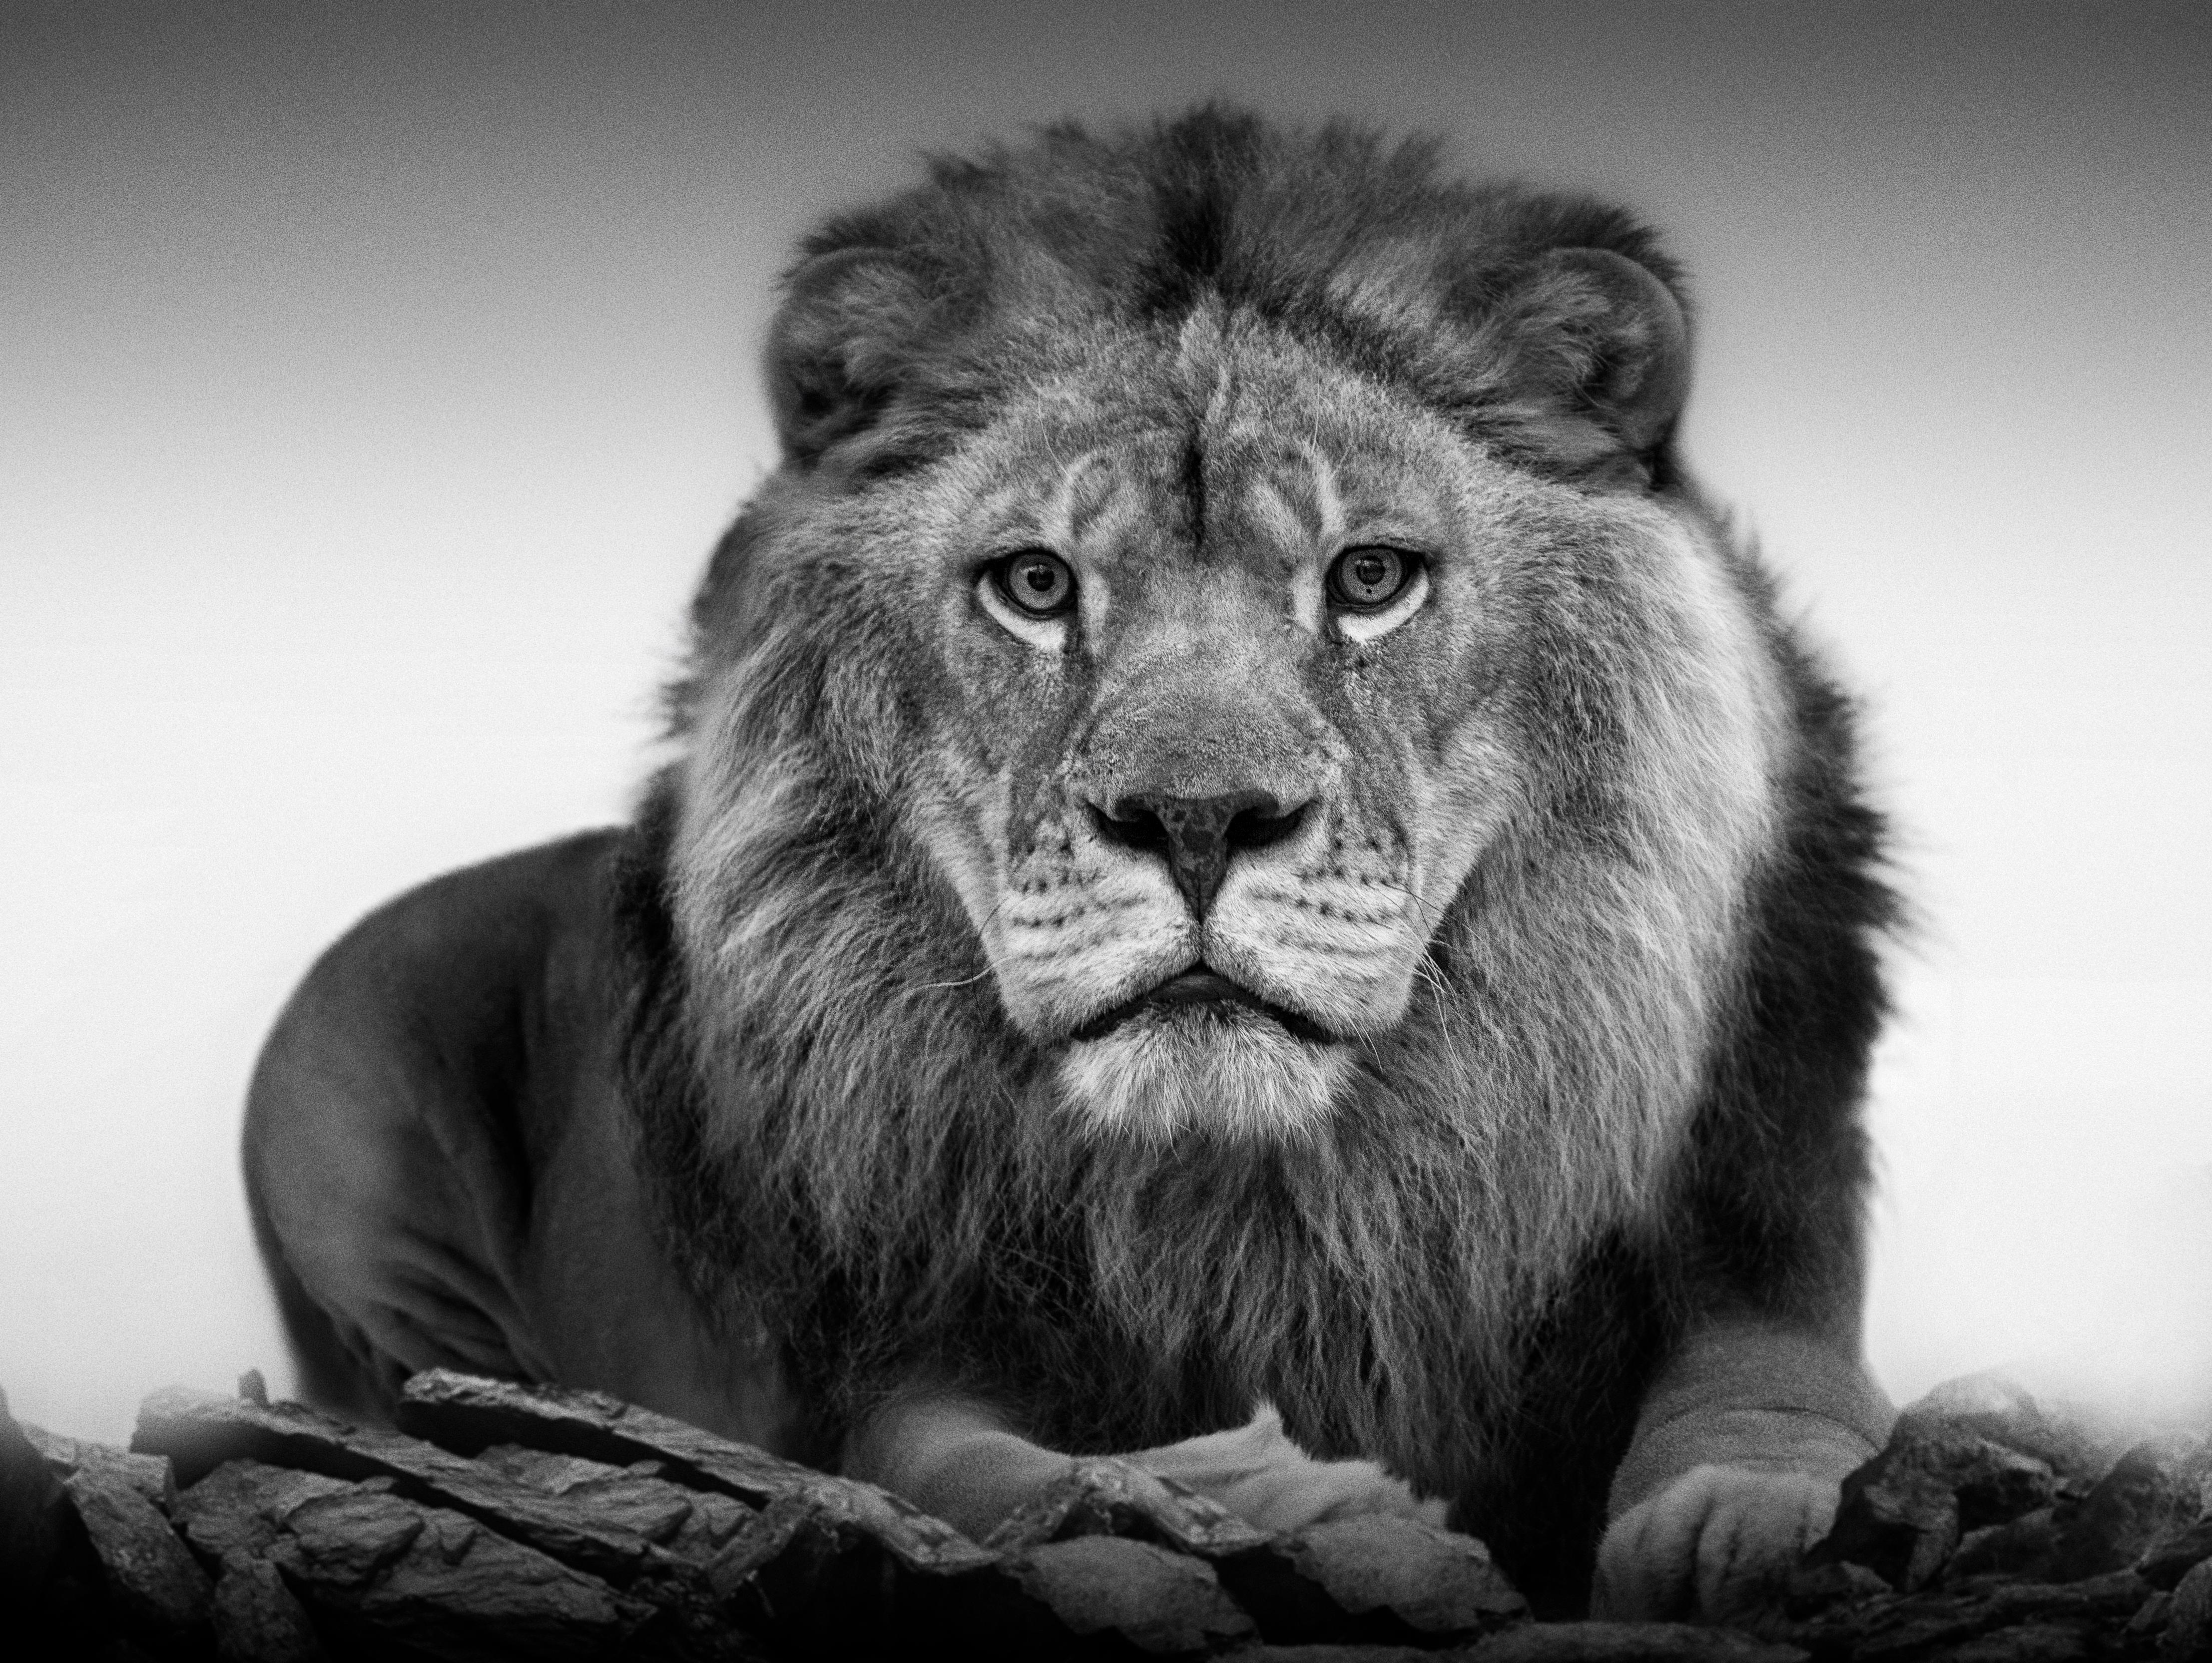 Shane Russeck Black and White Photograph -  40x60 Lion Portrait,  Black and White Lion Photography Photograph Signed Art